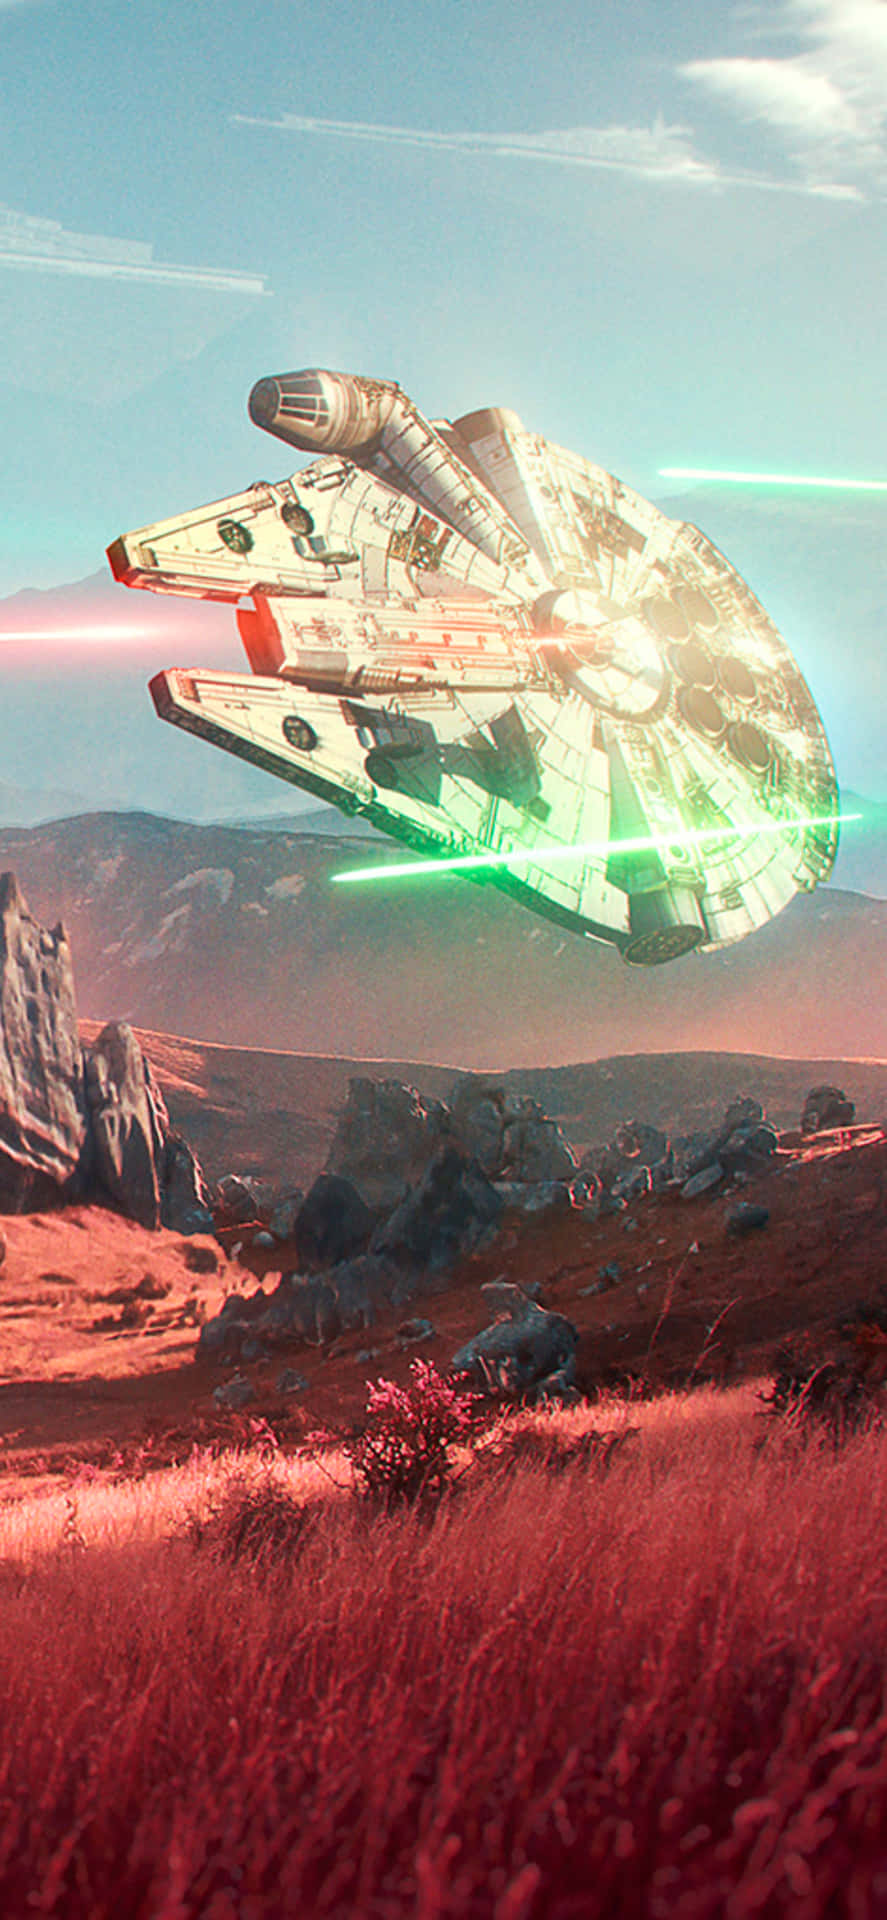 Geared up for interstellar travel aboard the Millenium Falcon Wallpaper